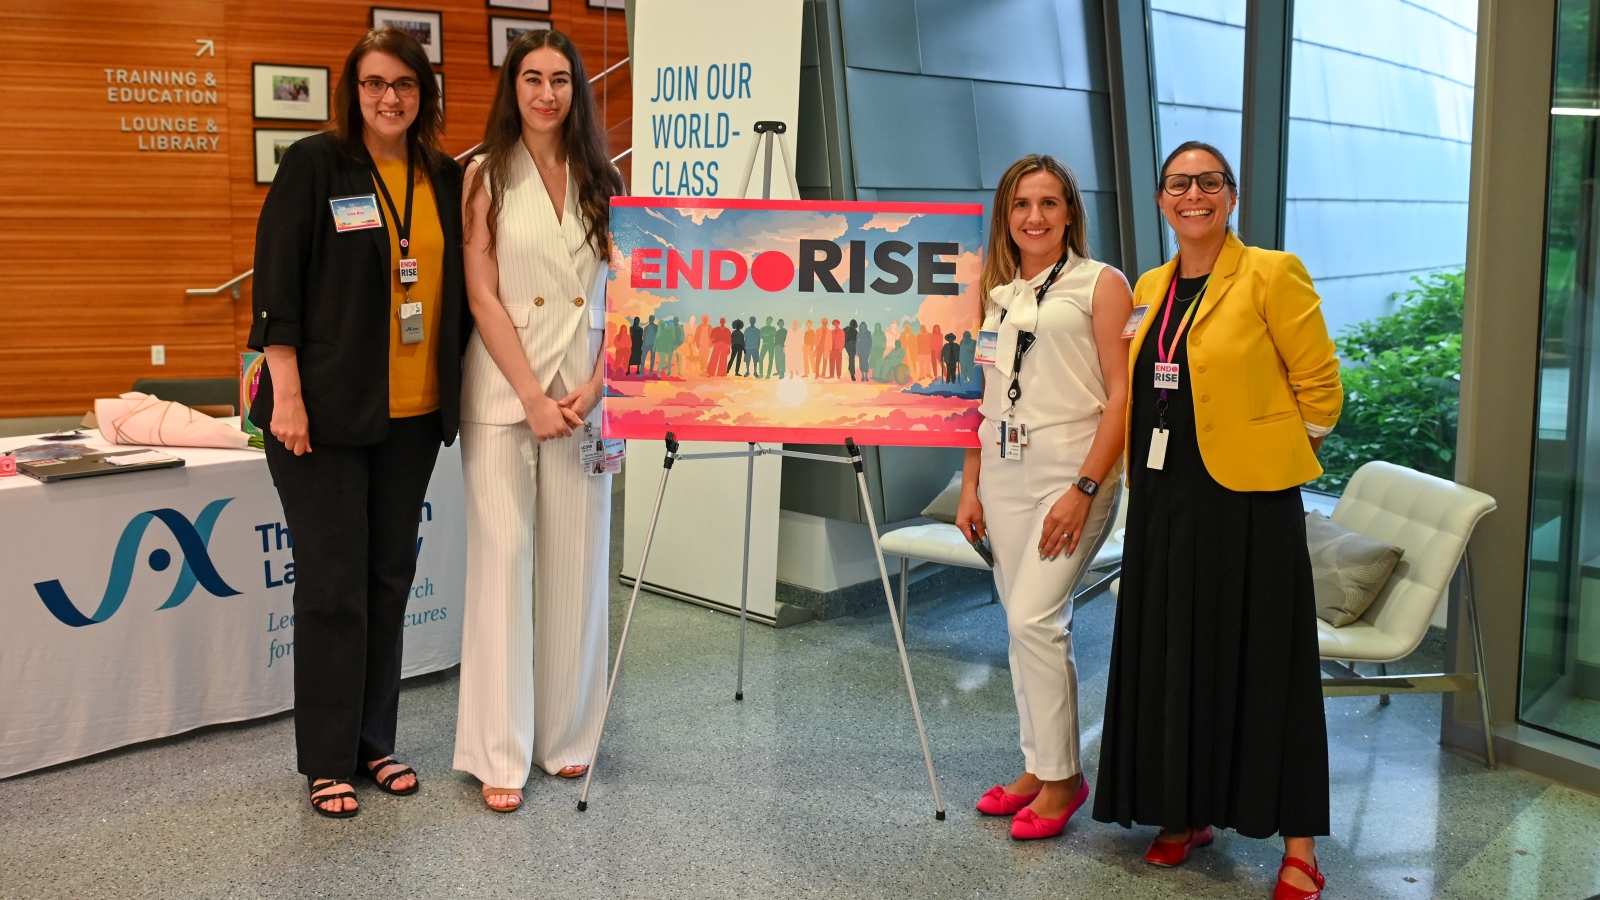 Members of the EndoRISE team (L-R): Lisa Roy, director, government and community relations, JAX; Kayceety Mullaj, EndoRISE research coordinator and clinical research assistant at UConn Health; Jasmina Kuljancic, program manager at EndoRISE and JAX; Elise Courtois, Ph.D., EndoRISE co-director and director of Single Cell Biology at JAX.